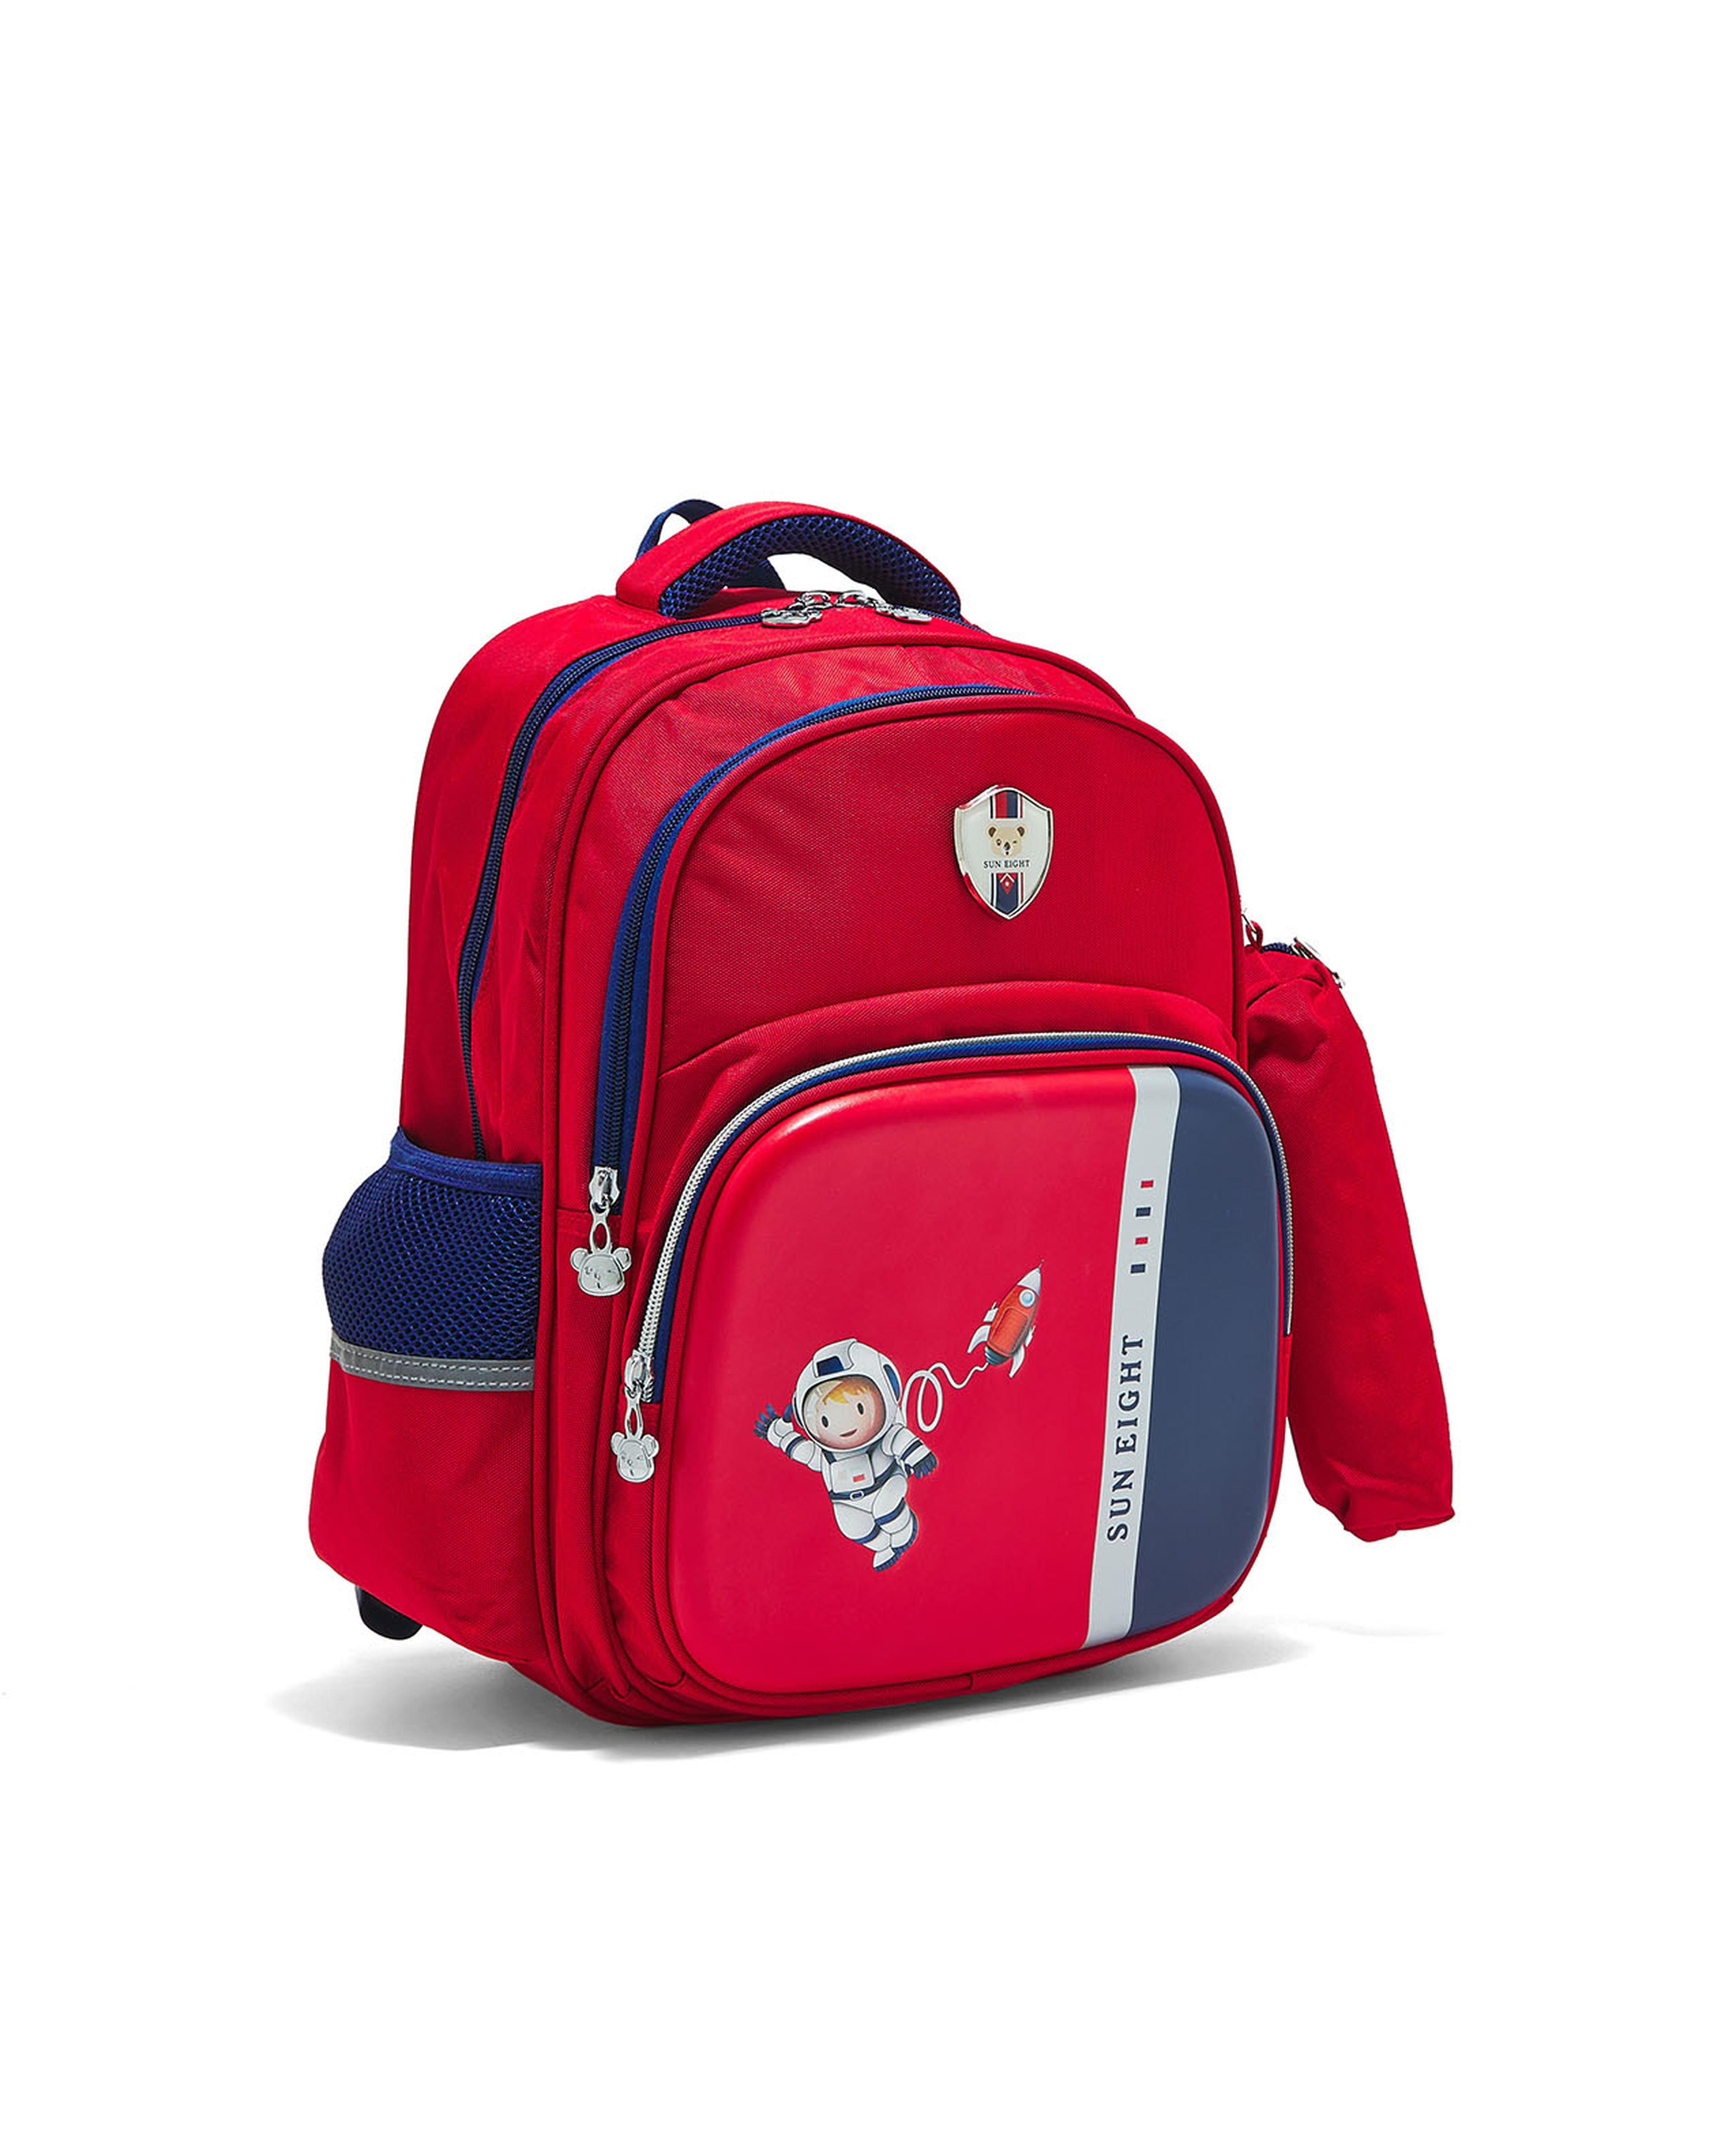 Printed School Backpack and Pencil Case Set